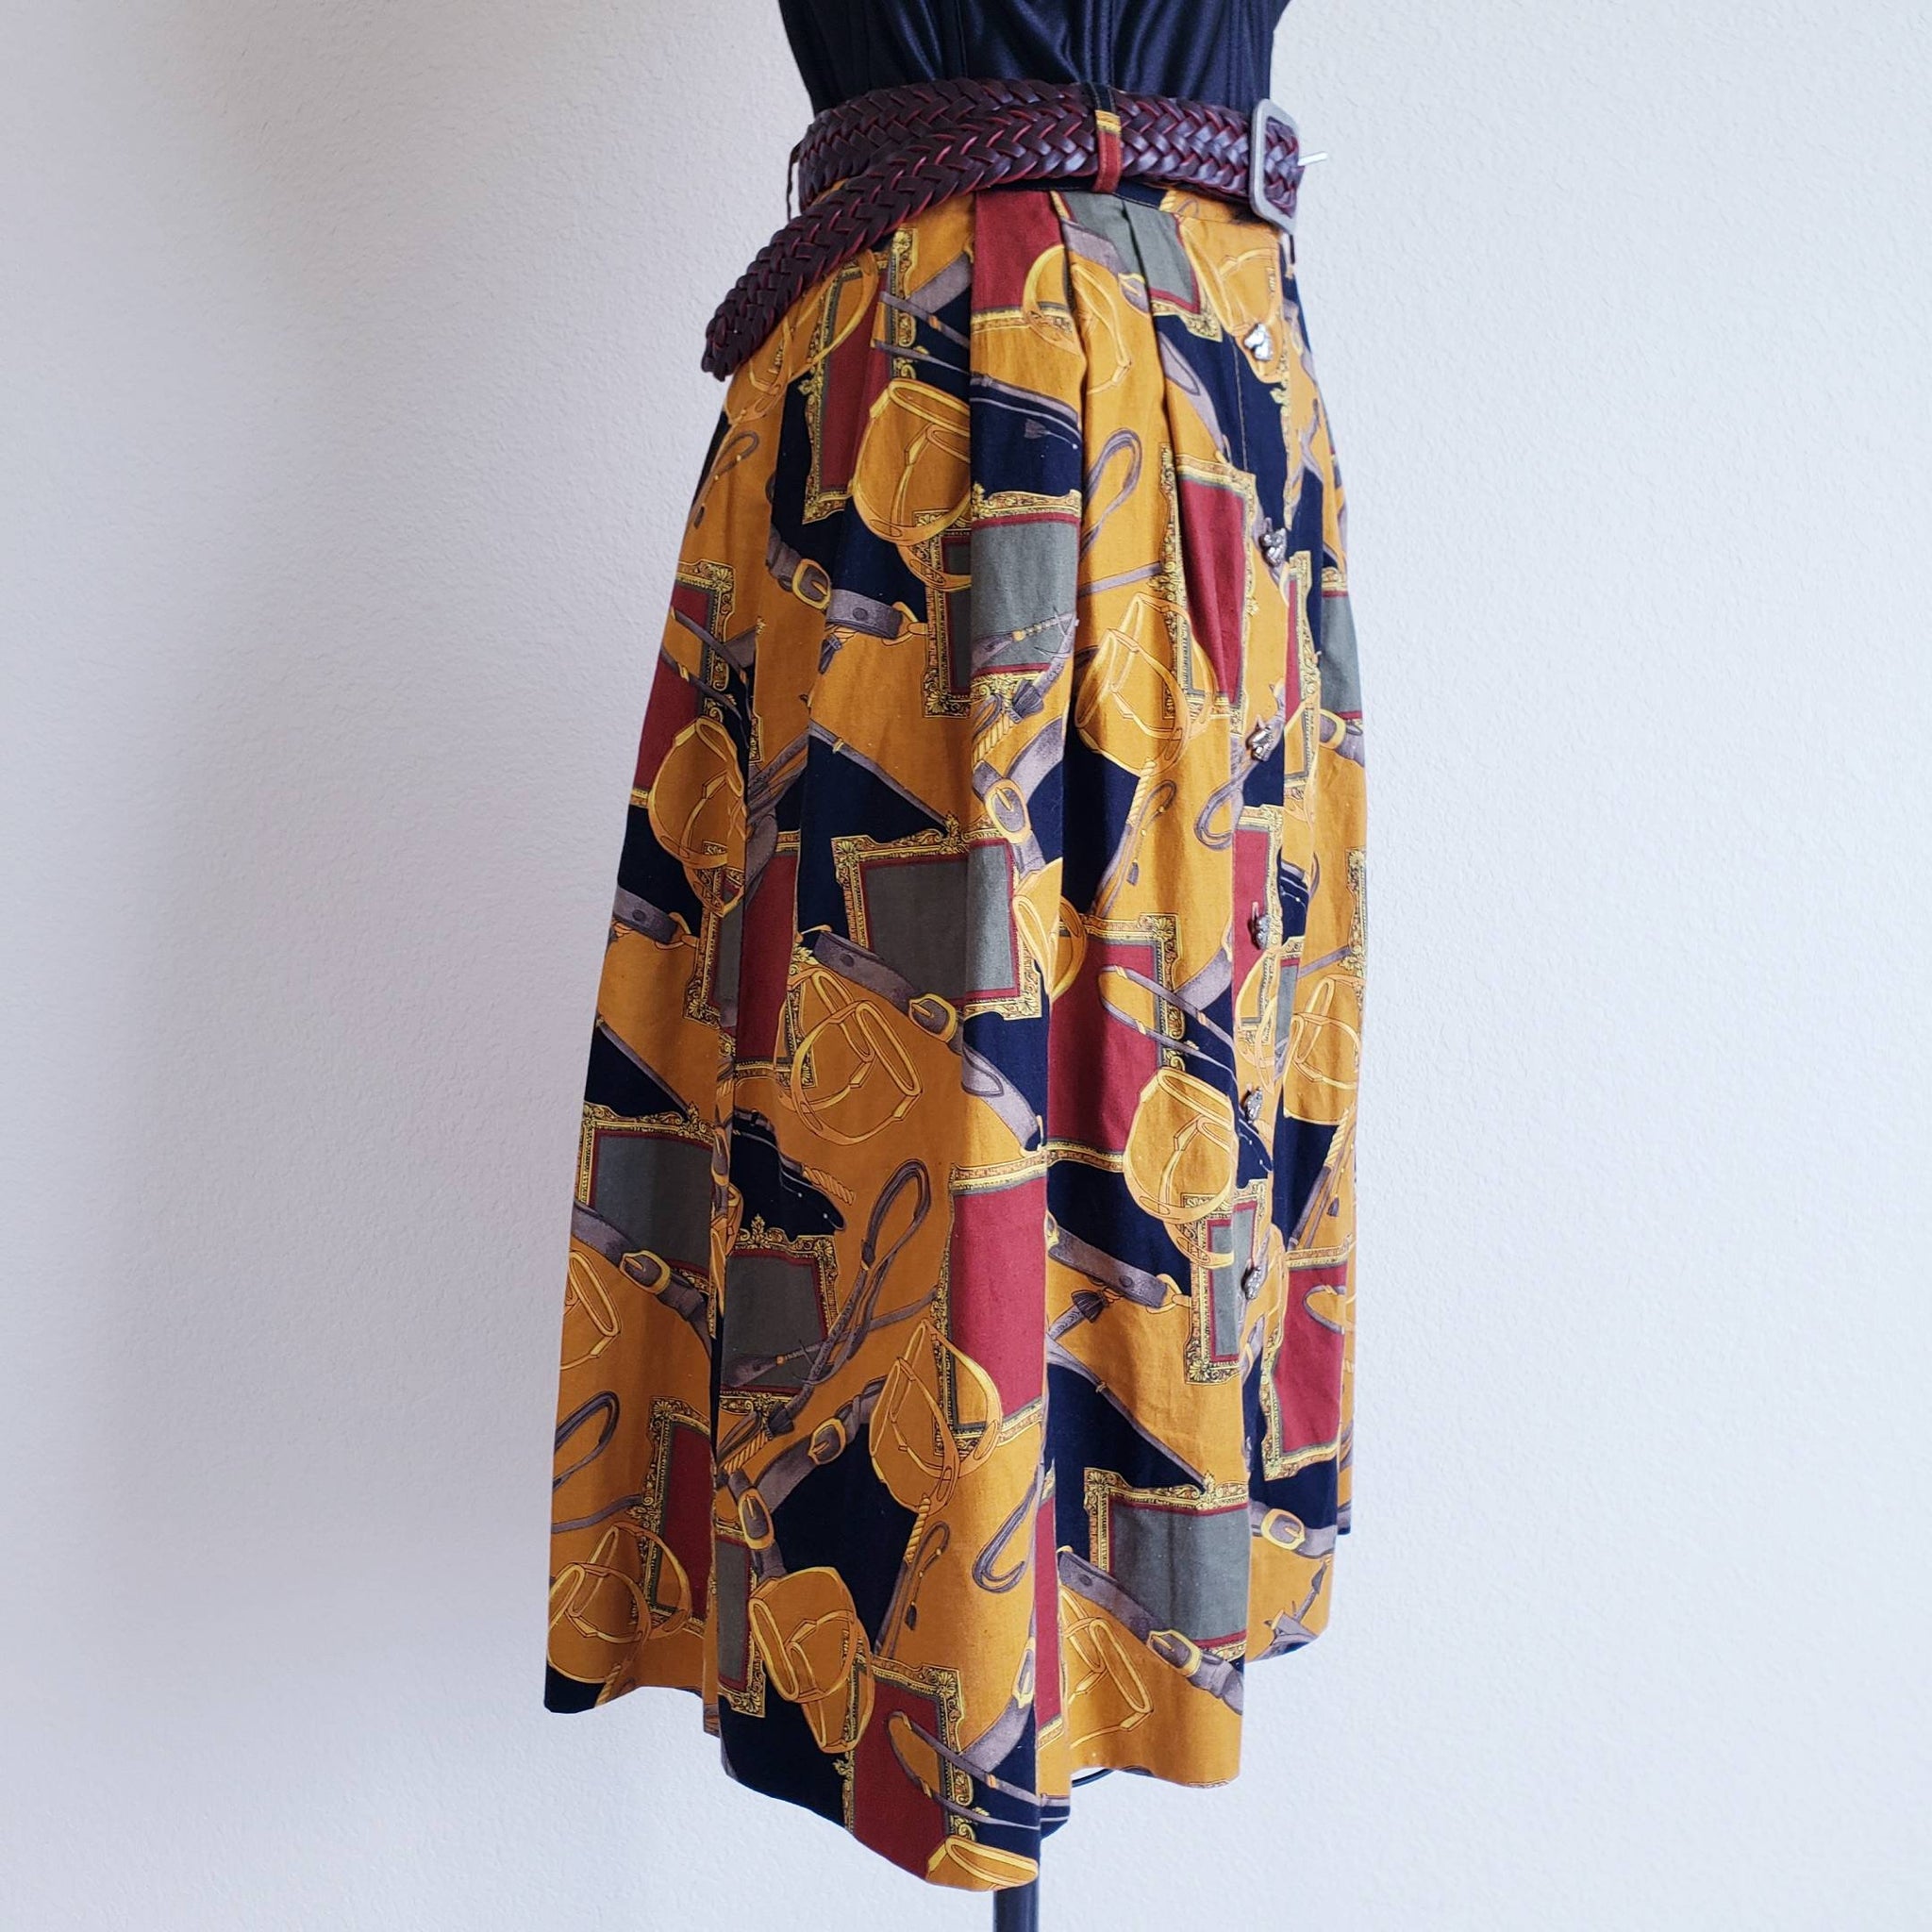 Vintage 90s On The Verge Equestrian Print Cotton Skirt - ChicCityVintage